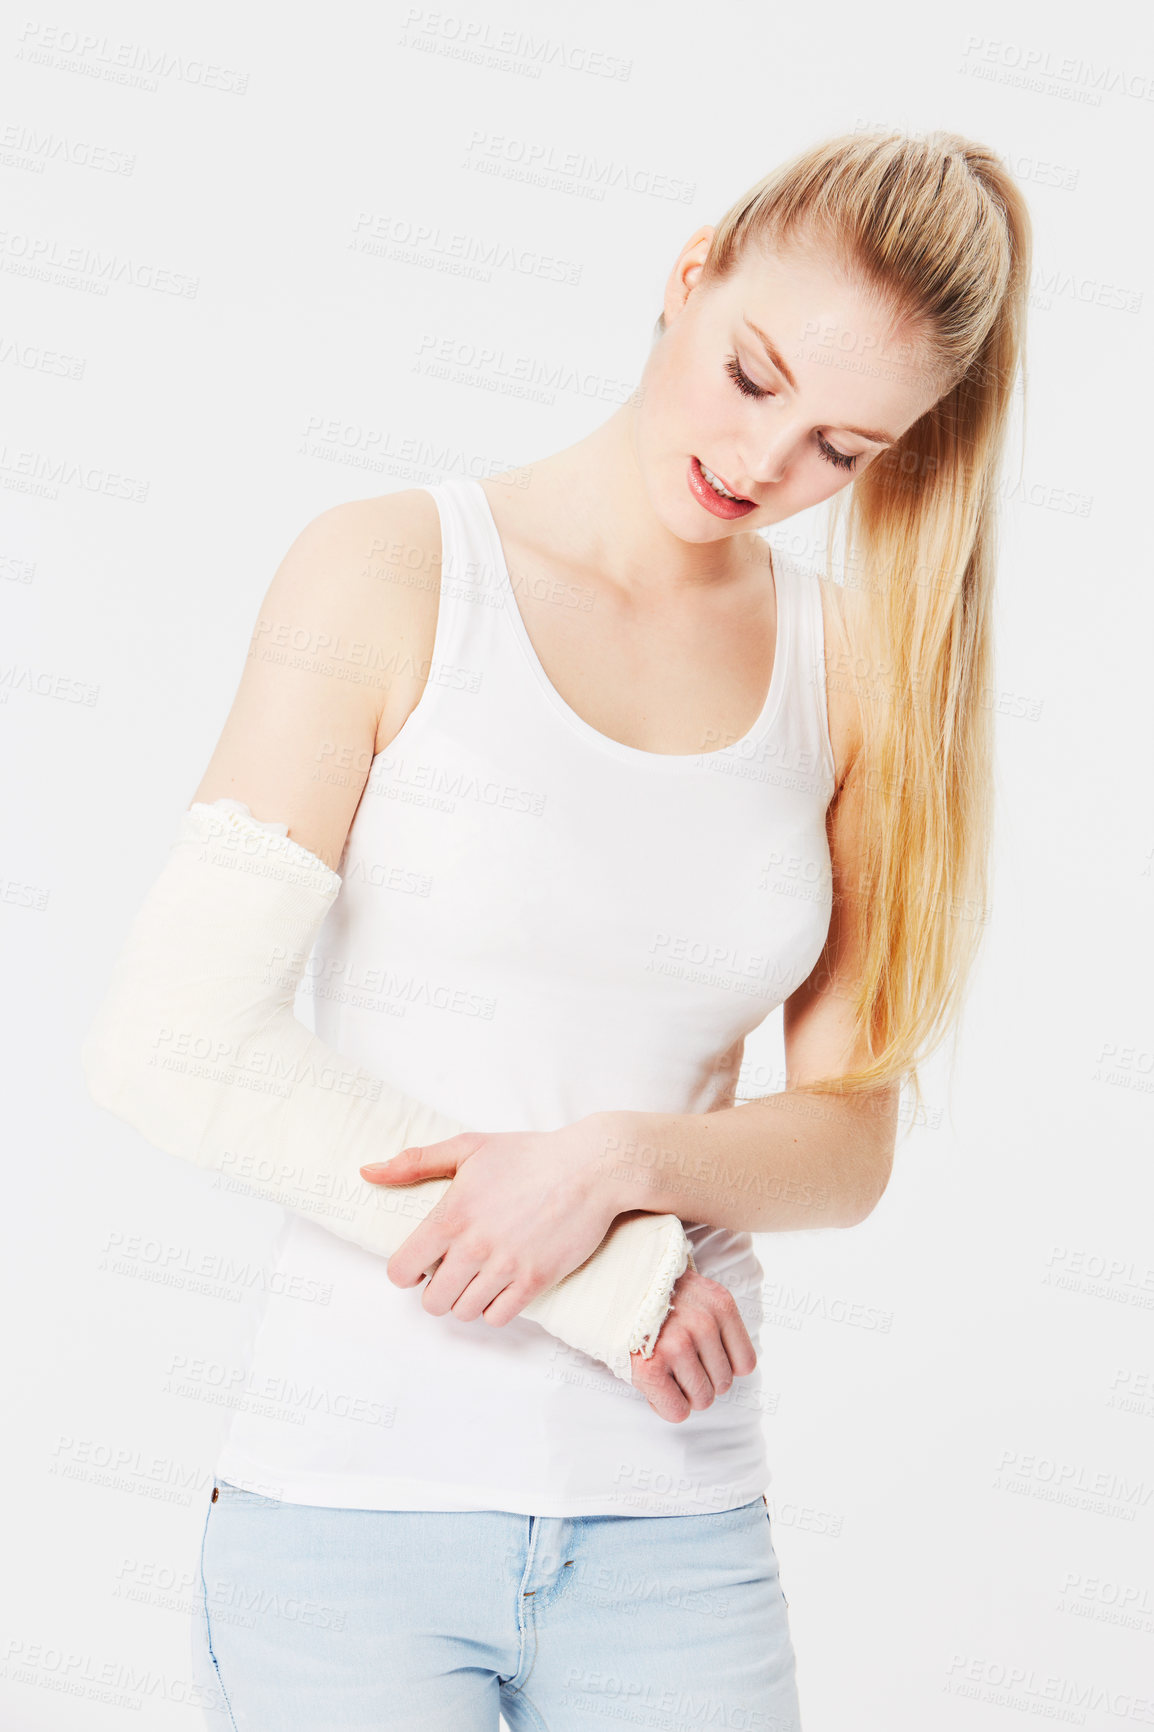 Buy stock photo Injury, pain and woman with a broken arm after an accident isolated on a white background. Hurt, handicap and girl holding an injured and bandaged limb for an emergency in a brace on a backdrop